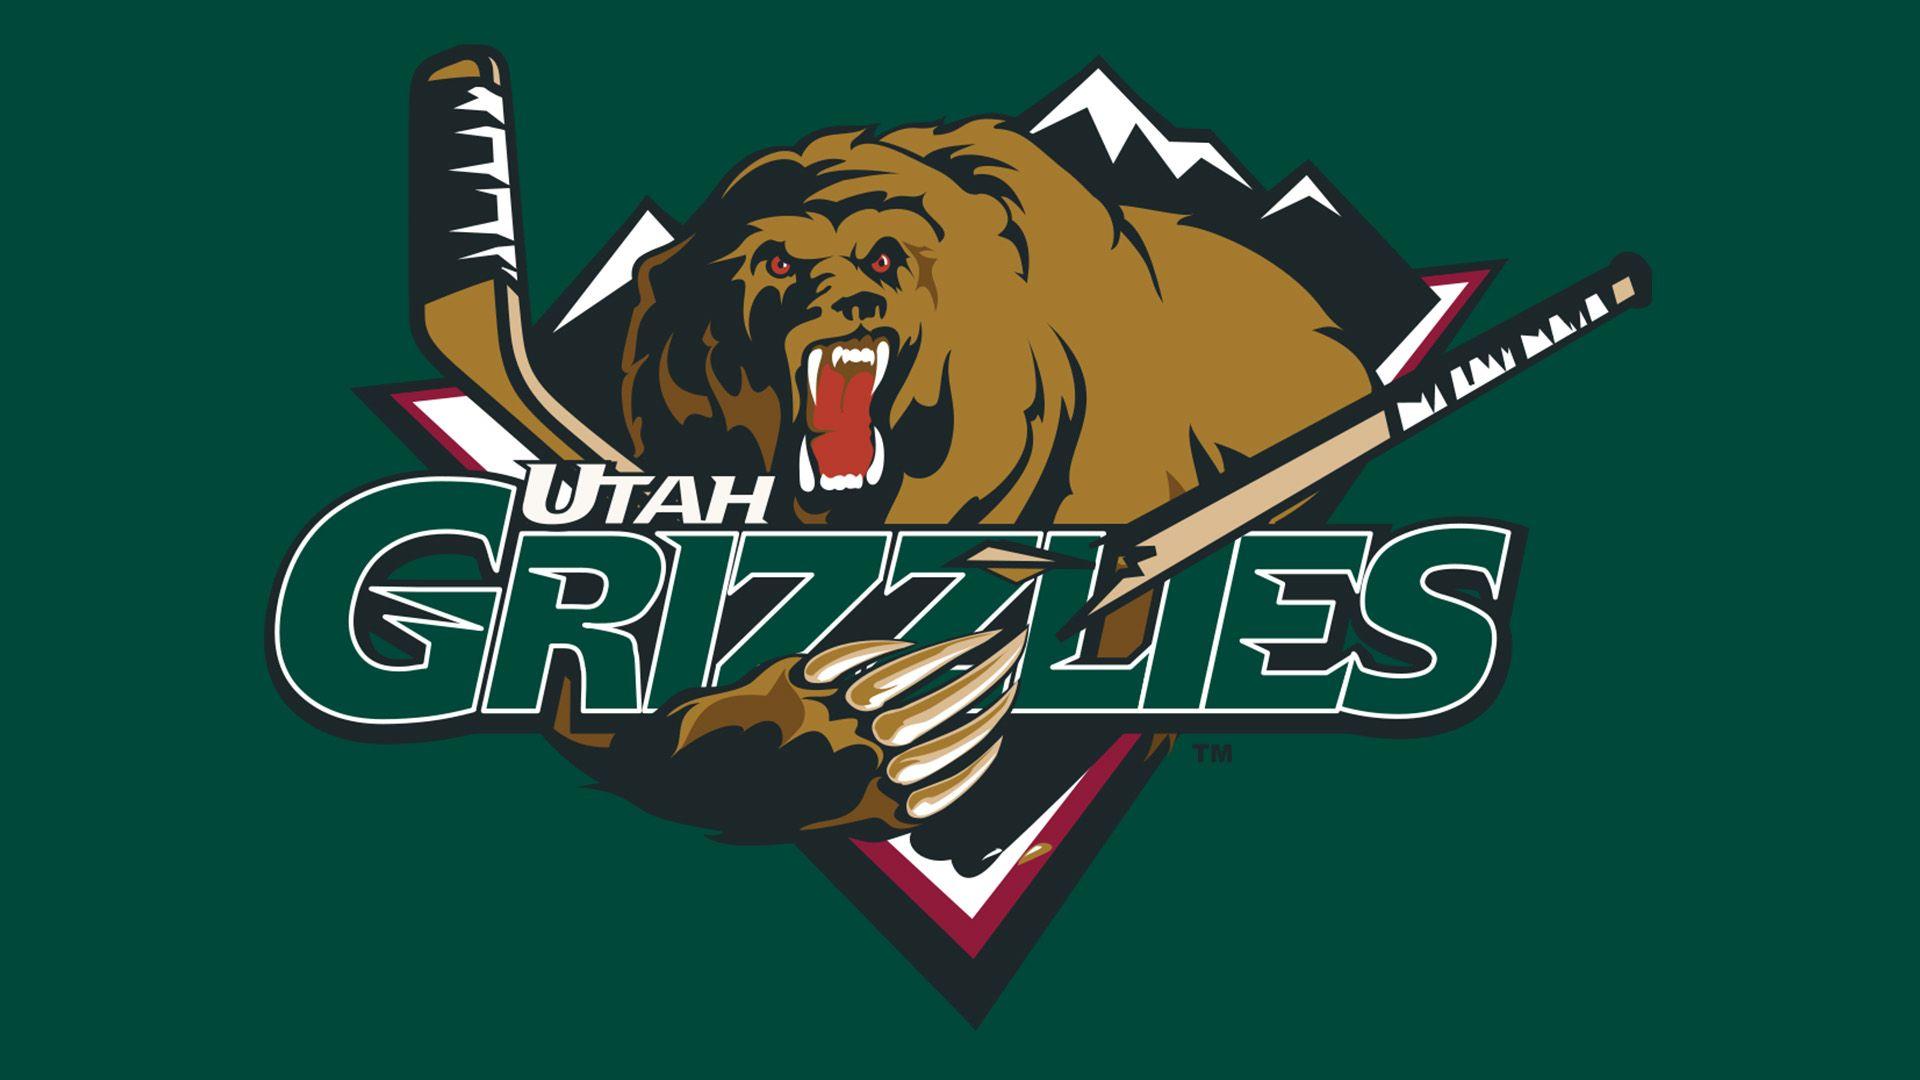 Grizzly Hockey Logo - Utah Grizzlies logo, Utah Grizzlies Symbol, Meaning, History and ...